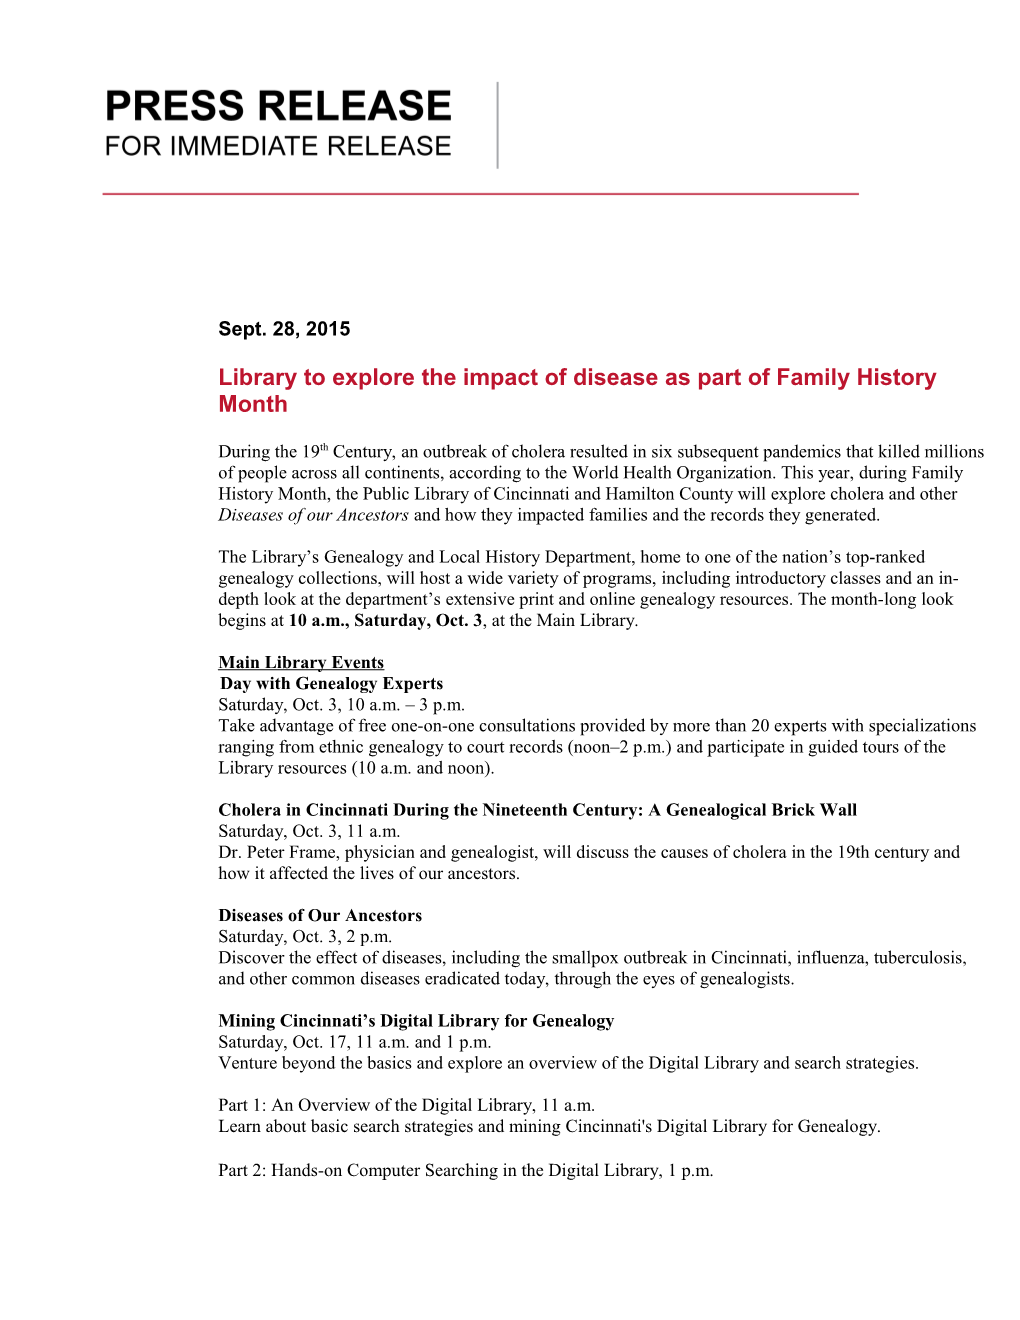 Library to Explore the Impact of Disease As Part of Family History Month